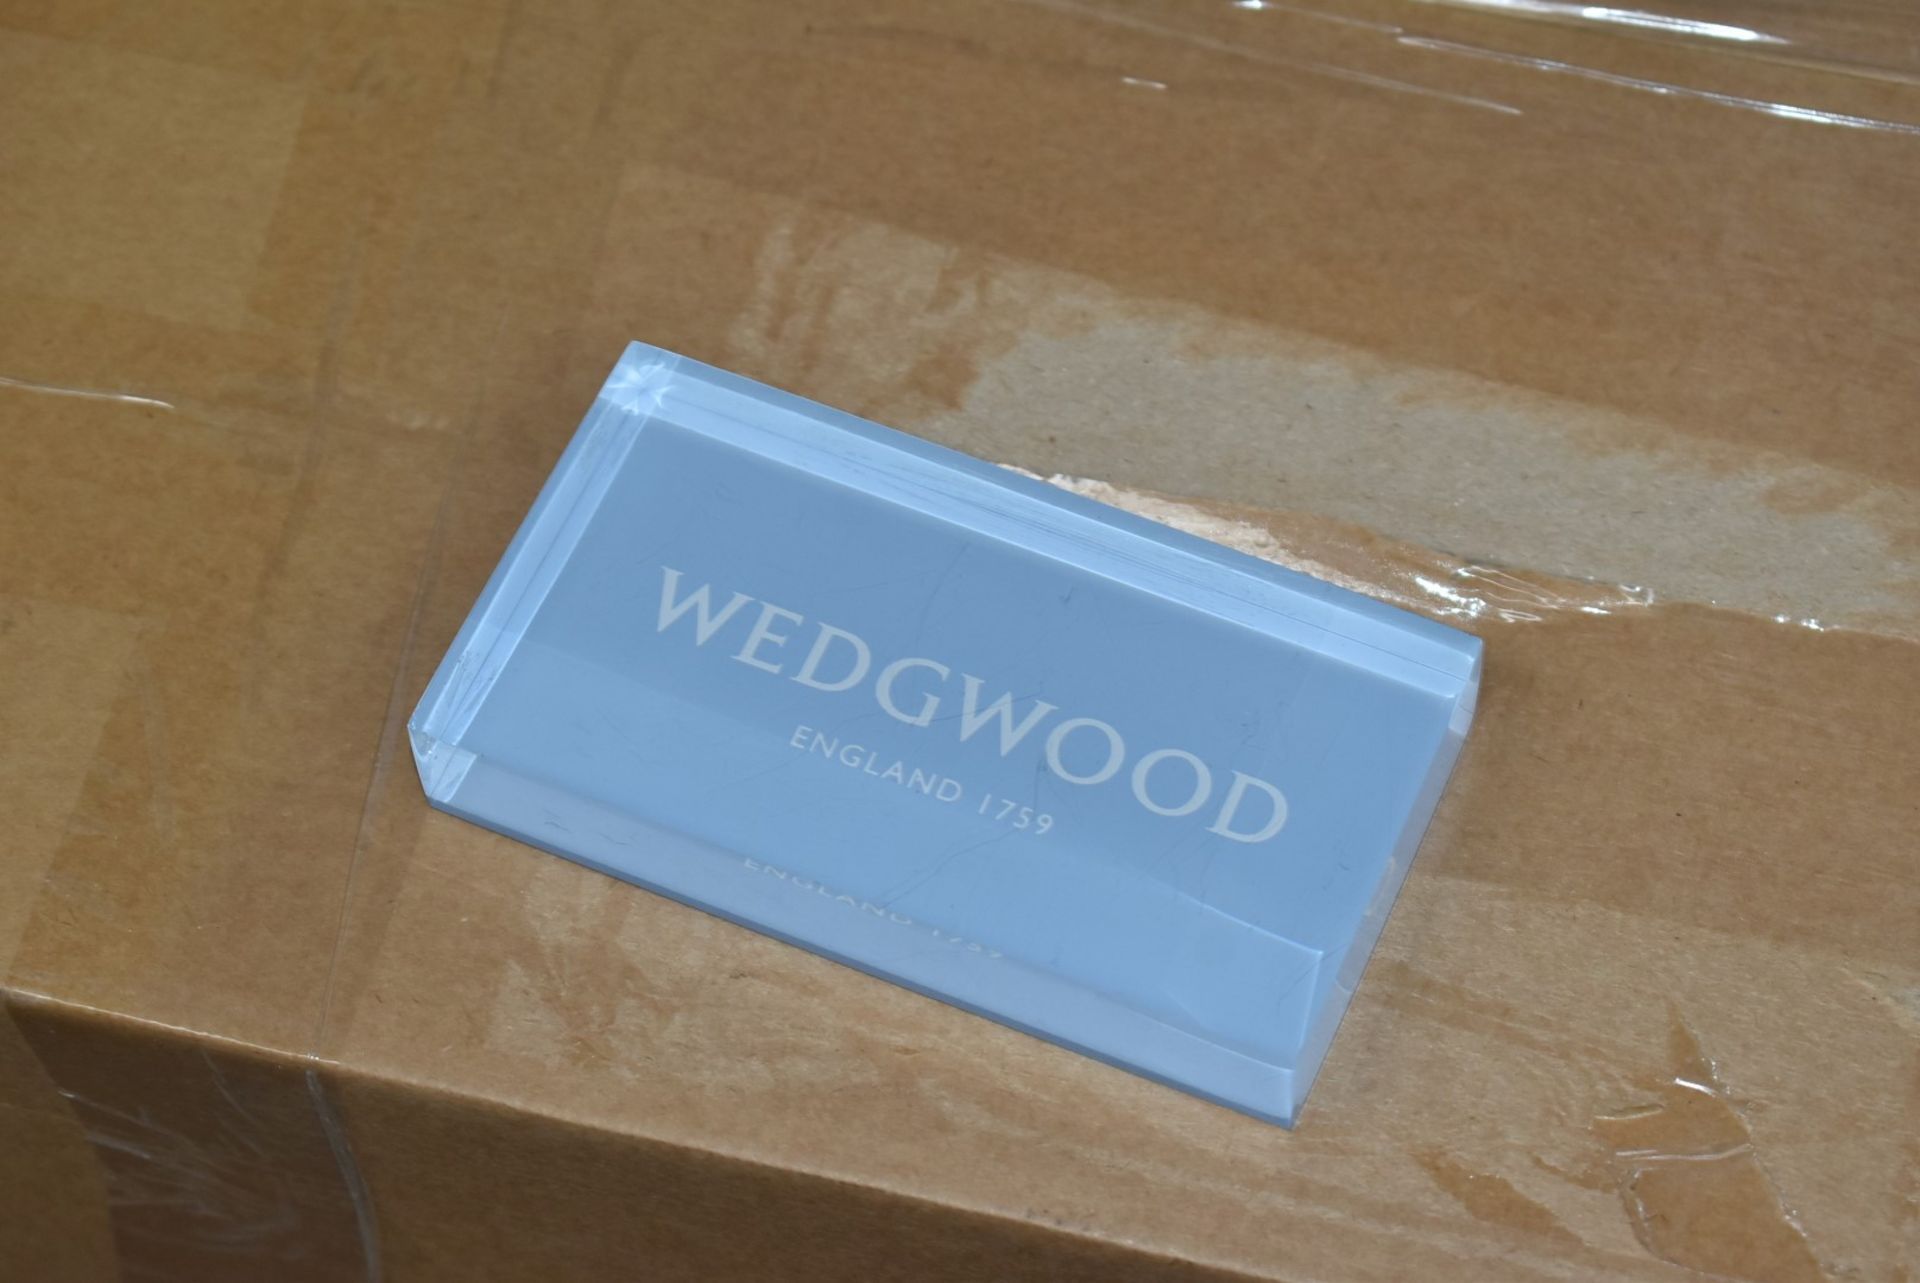 1 x Wedgewood Retail Pack - Includes 3 x Various Sized Decoration Hanger Stands, Advertisement - Image 3 of 5